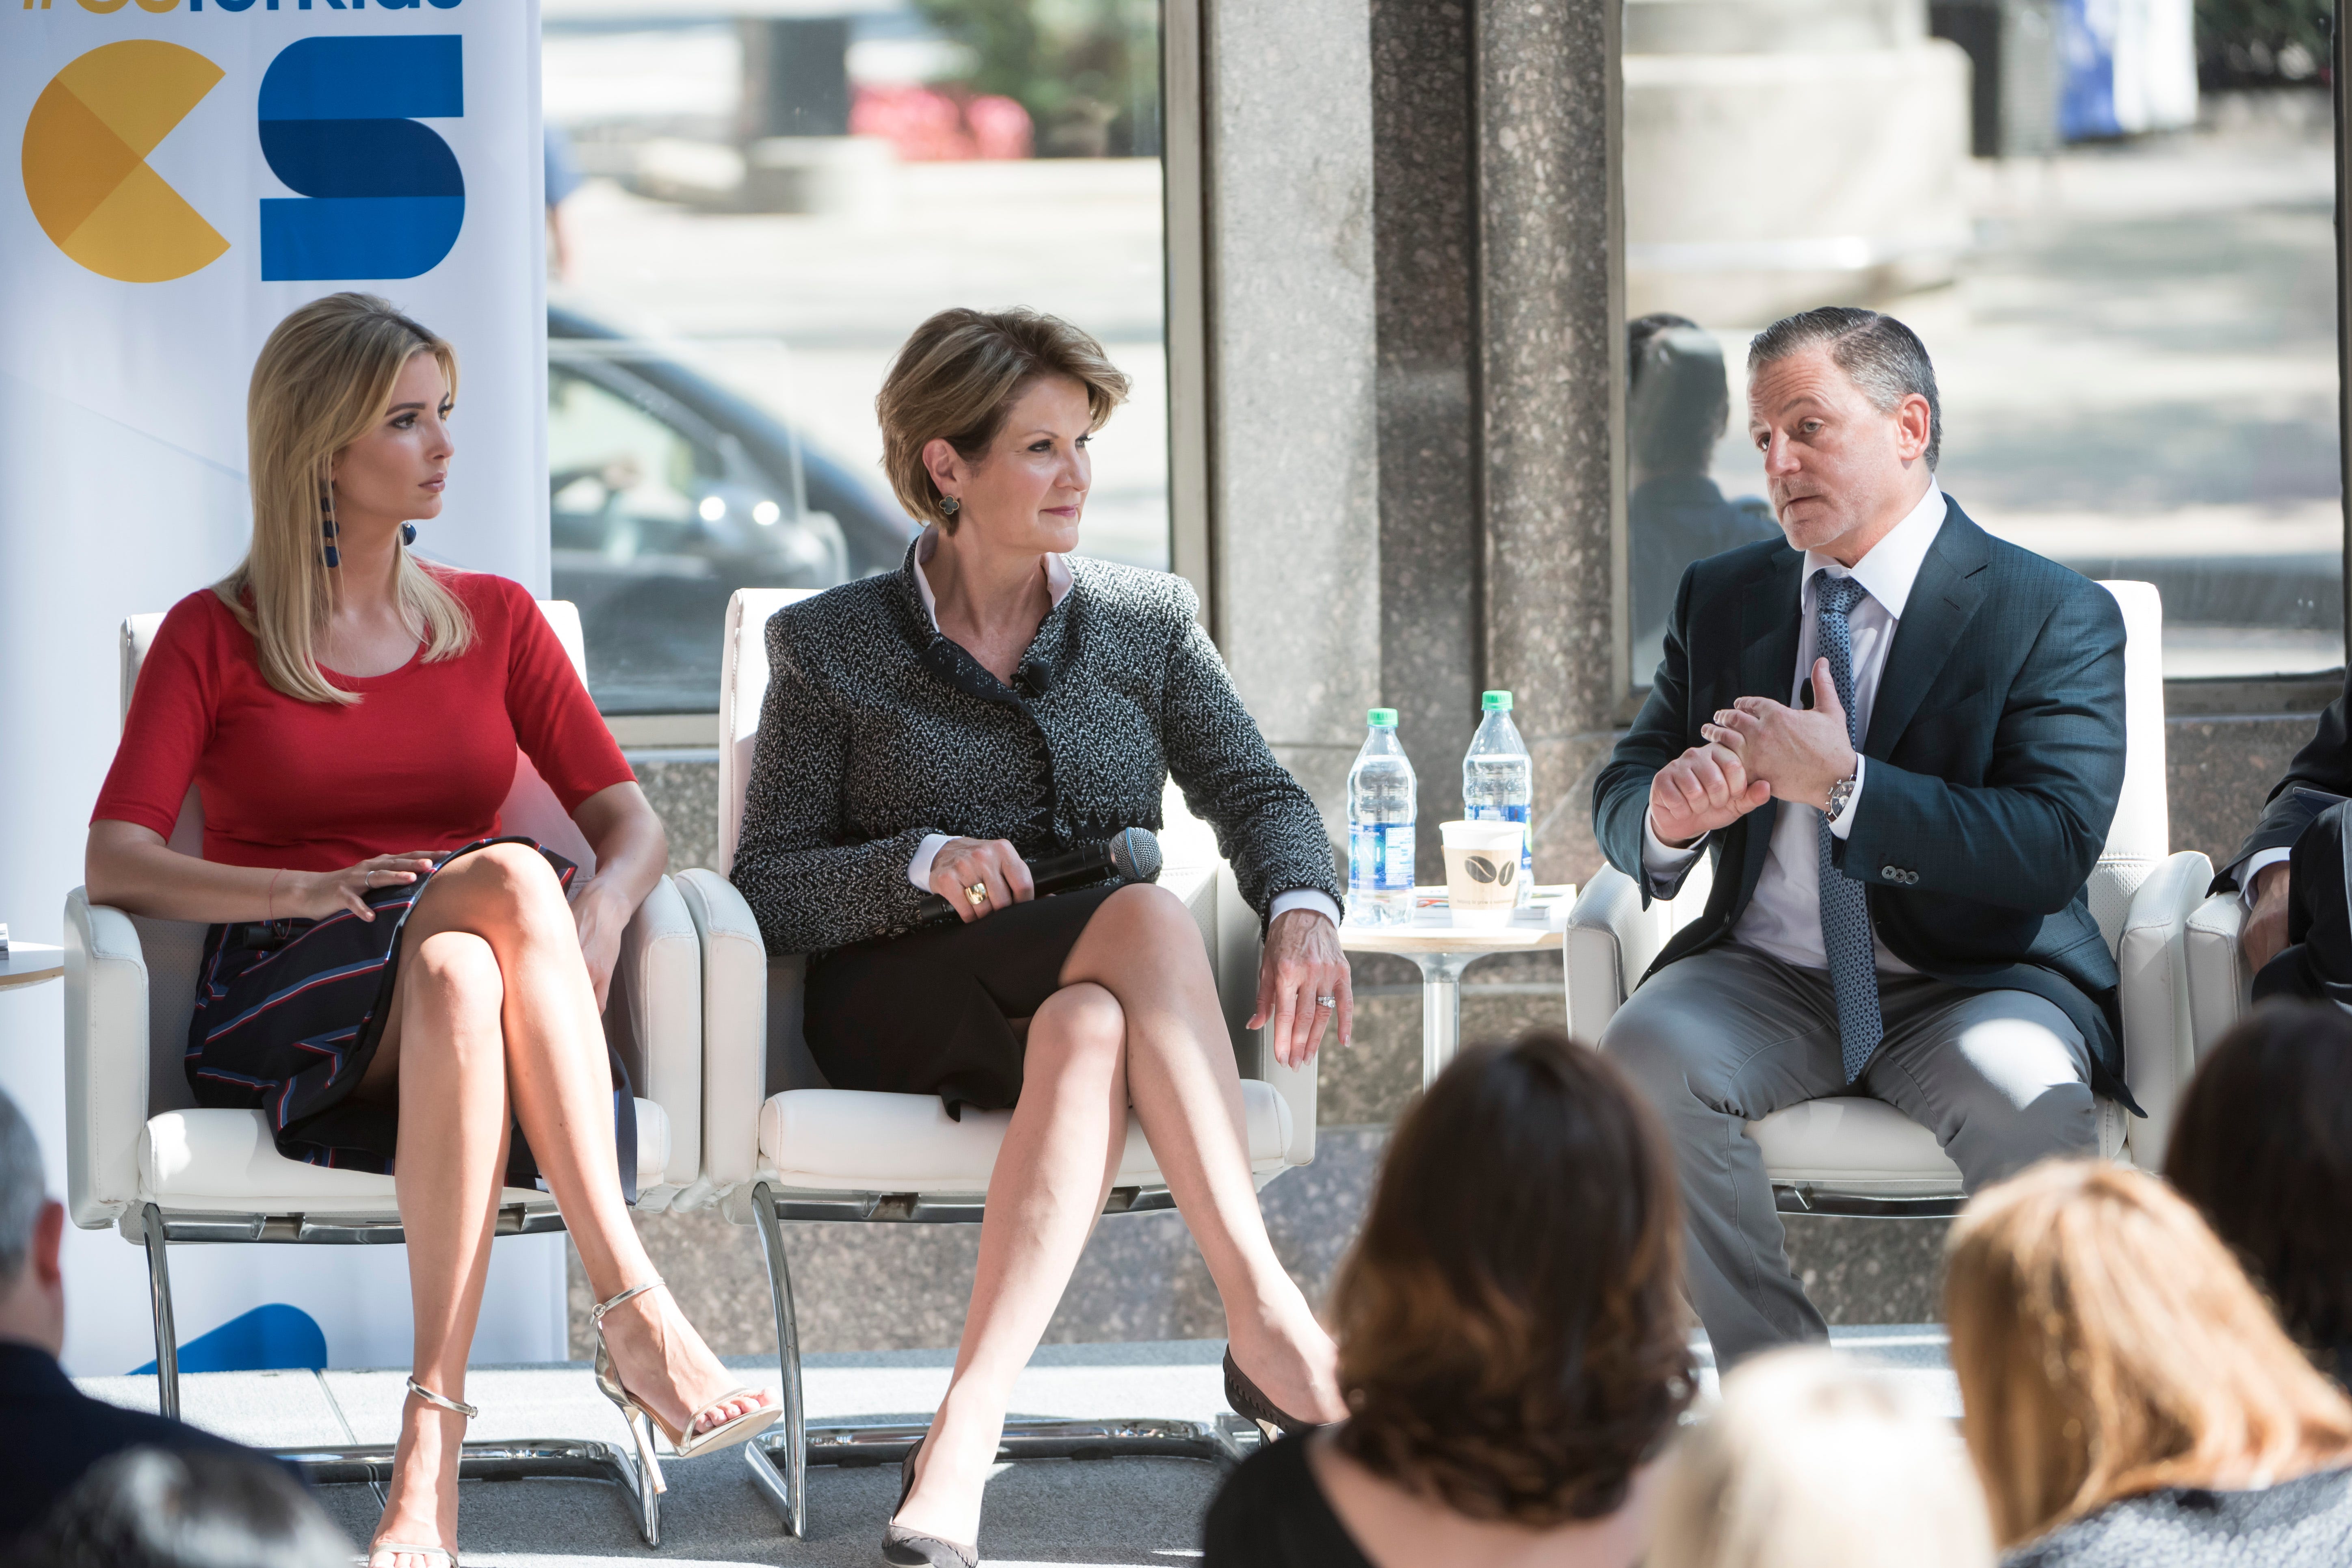 (From left) Ivanka Trump, White House, Assistant to the President, Marillyn Hewson, Chairwoman, President and Chief Executive Officer, Lockheed Martin, and Dan Gilbert, Chairman, Quicken Loans take part a panel discussion involving the Internet Association's announcement of a private sector commitment dedicated to K-12 computer science programs, at Detroit Design 136, in Detroit, September 26, 2017.